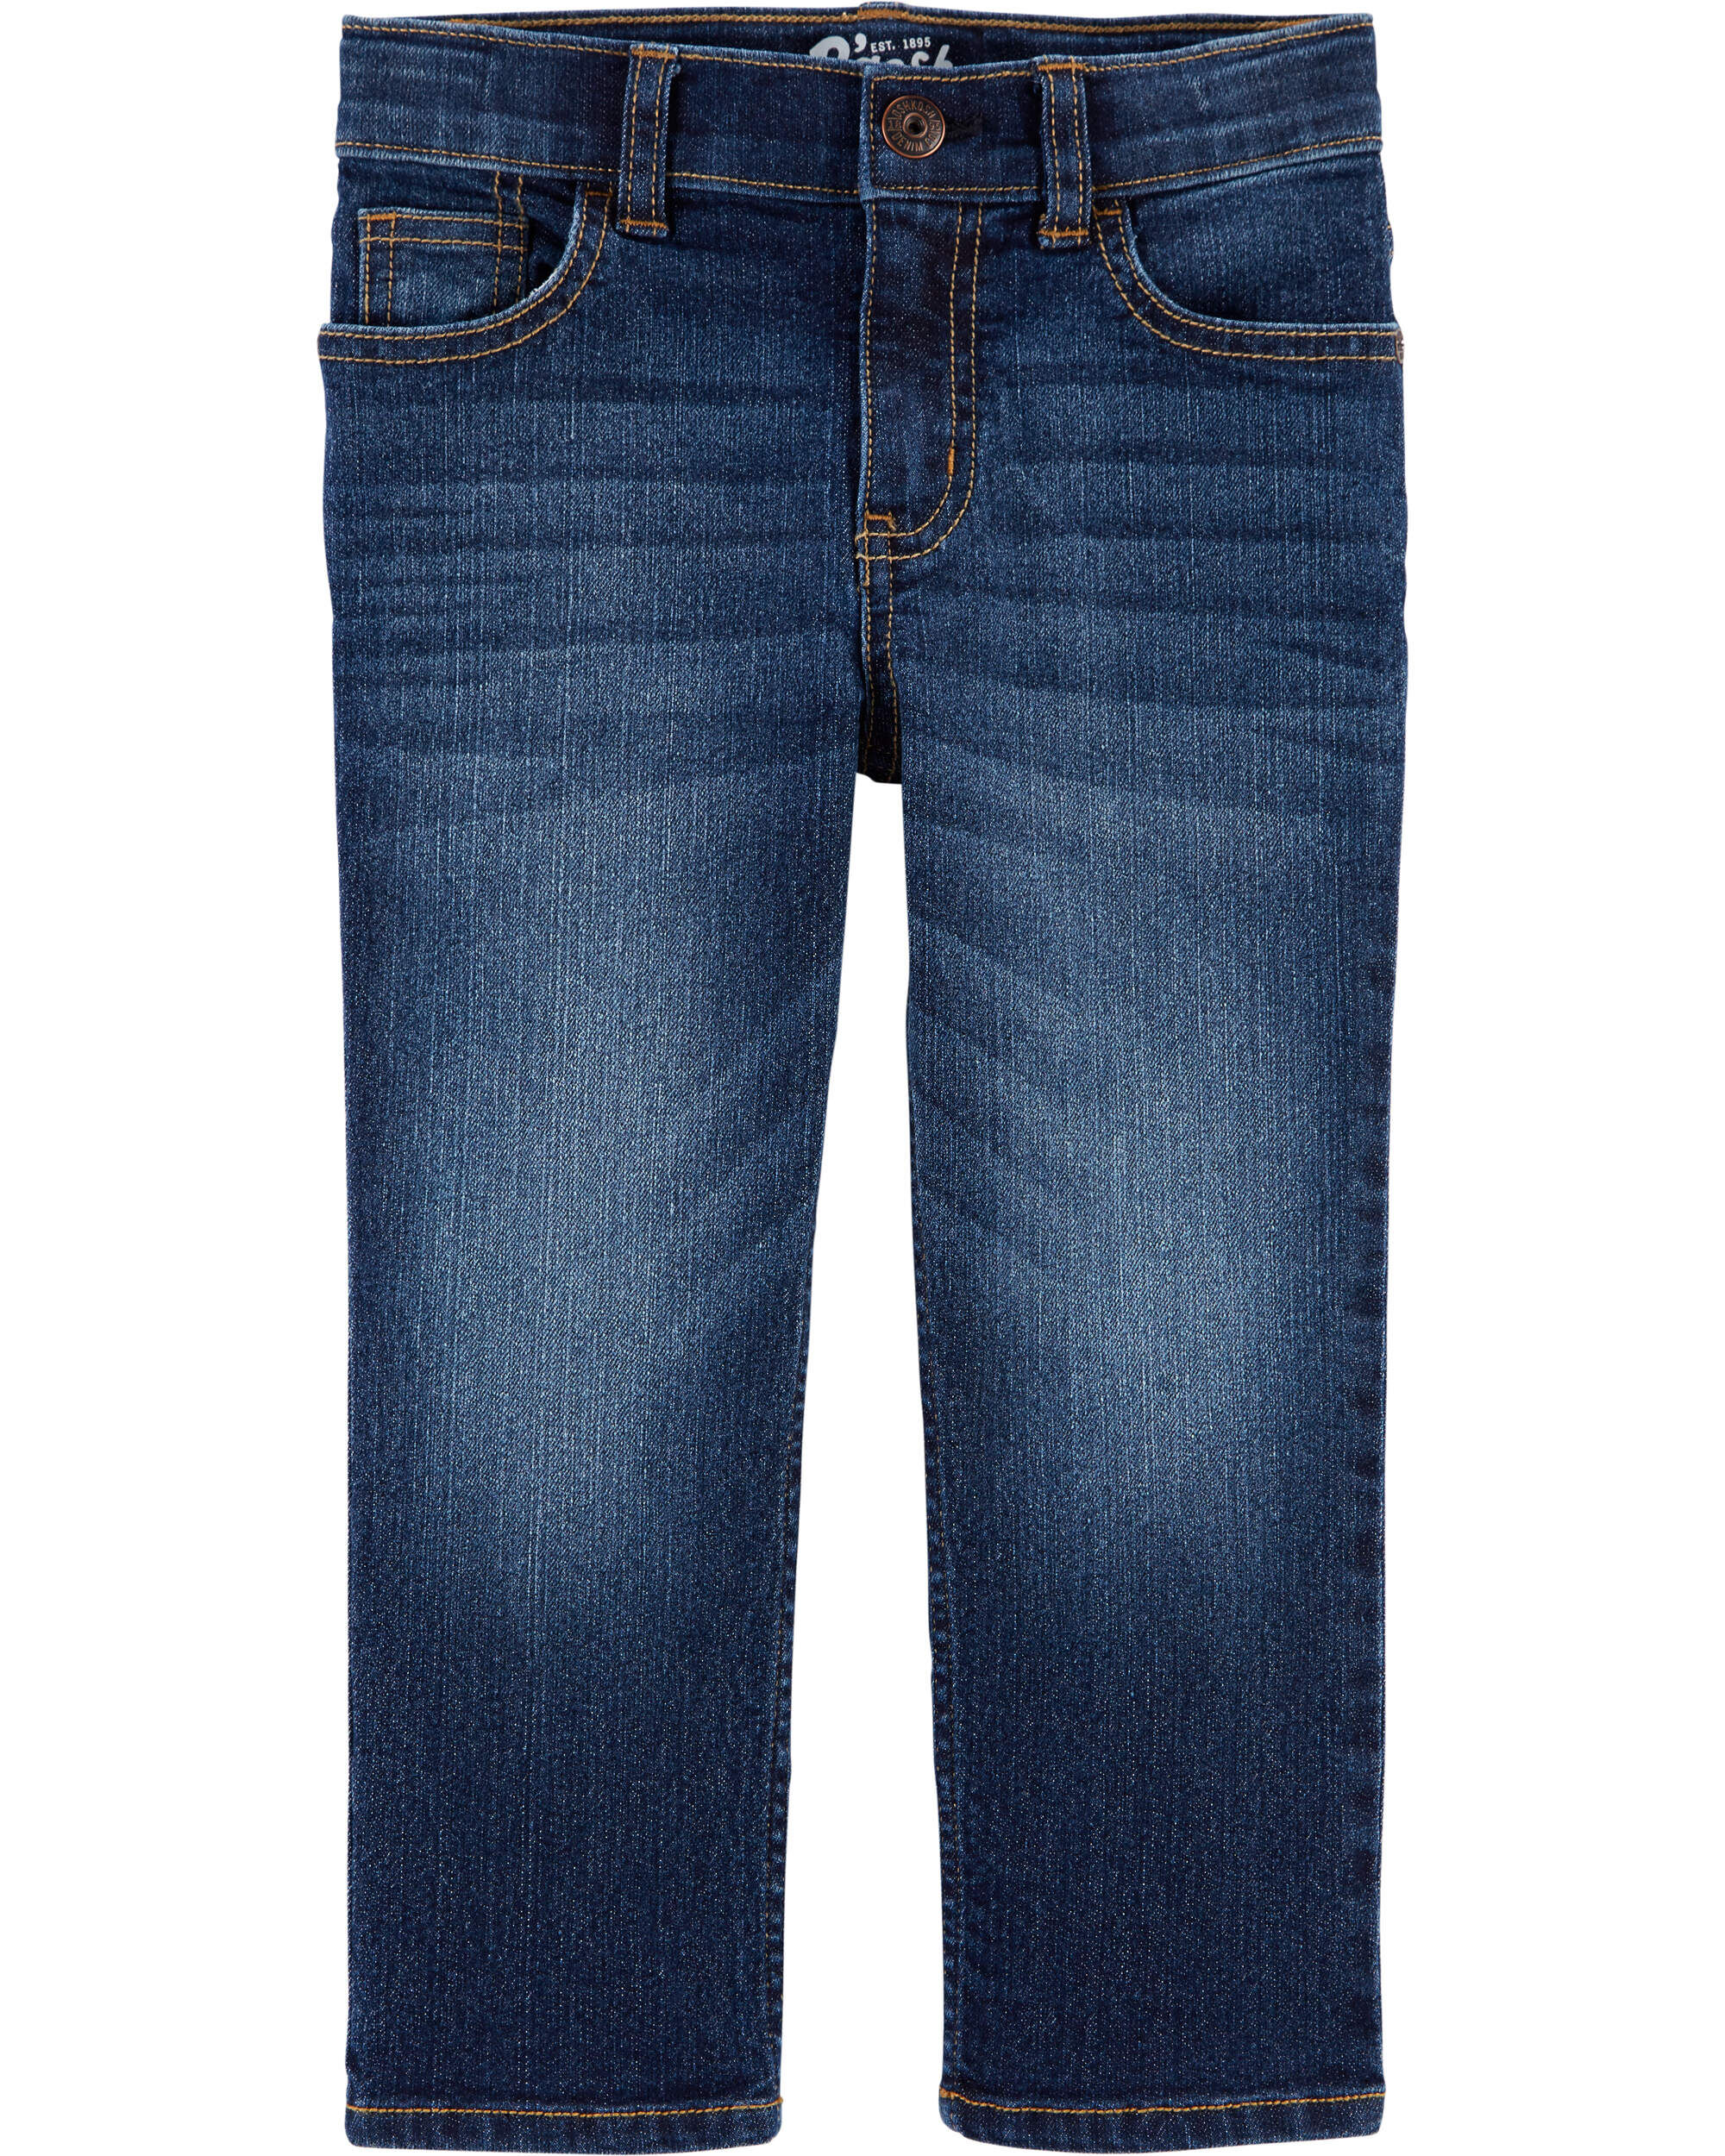 Baby Faded Blue Wash Classic Jeans Carter's